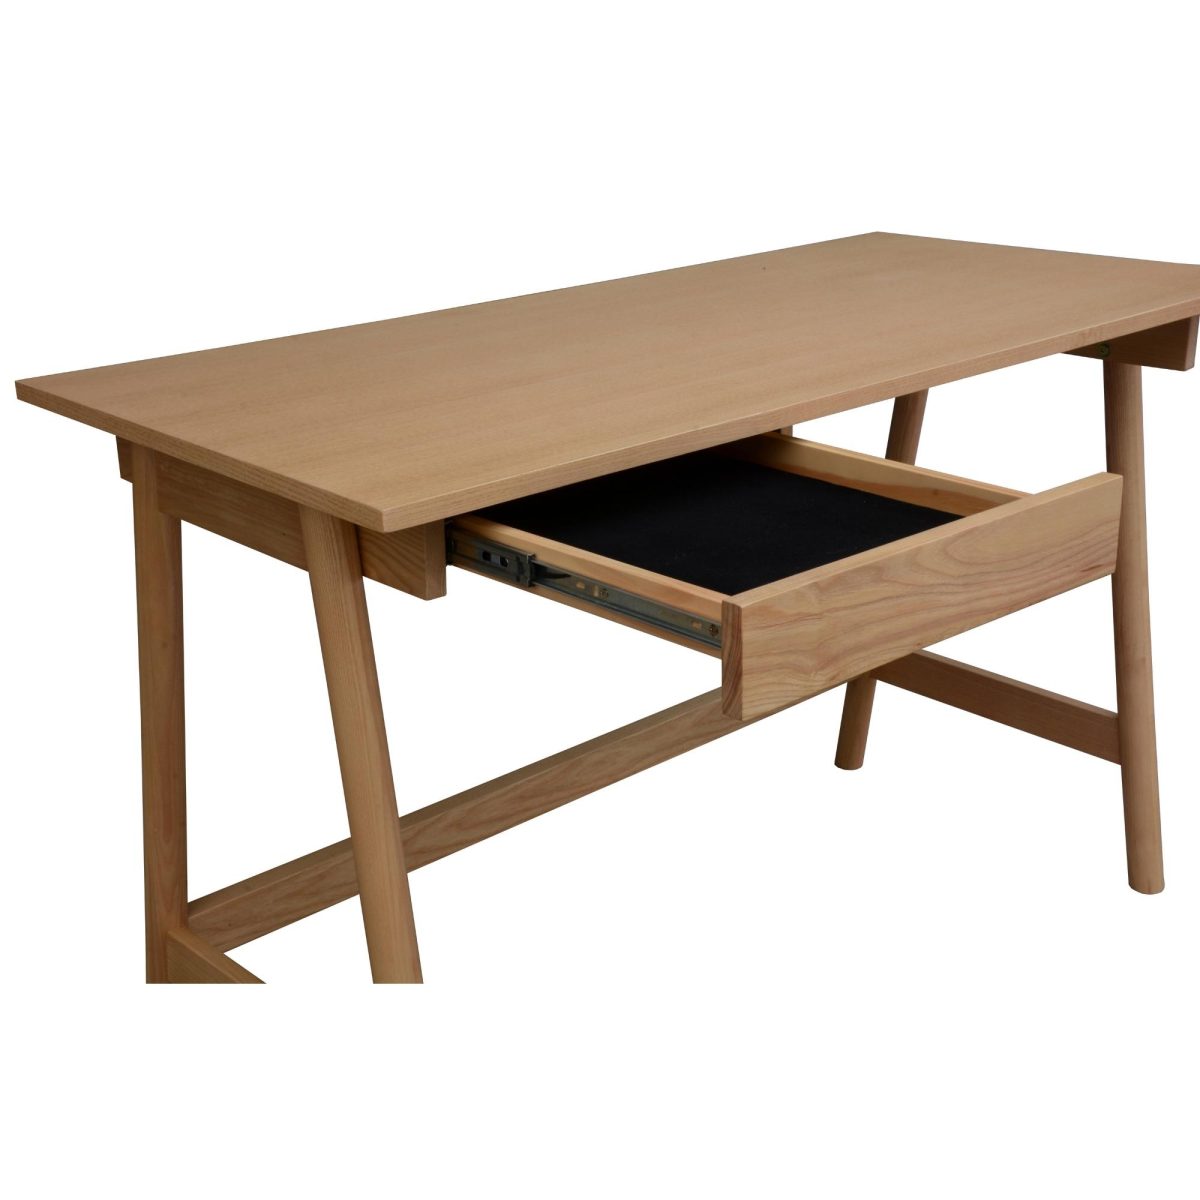 Mindil Office Desk Student Study Table Solid Wooden Timber Frame – Ash Natural